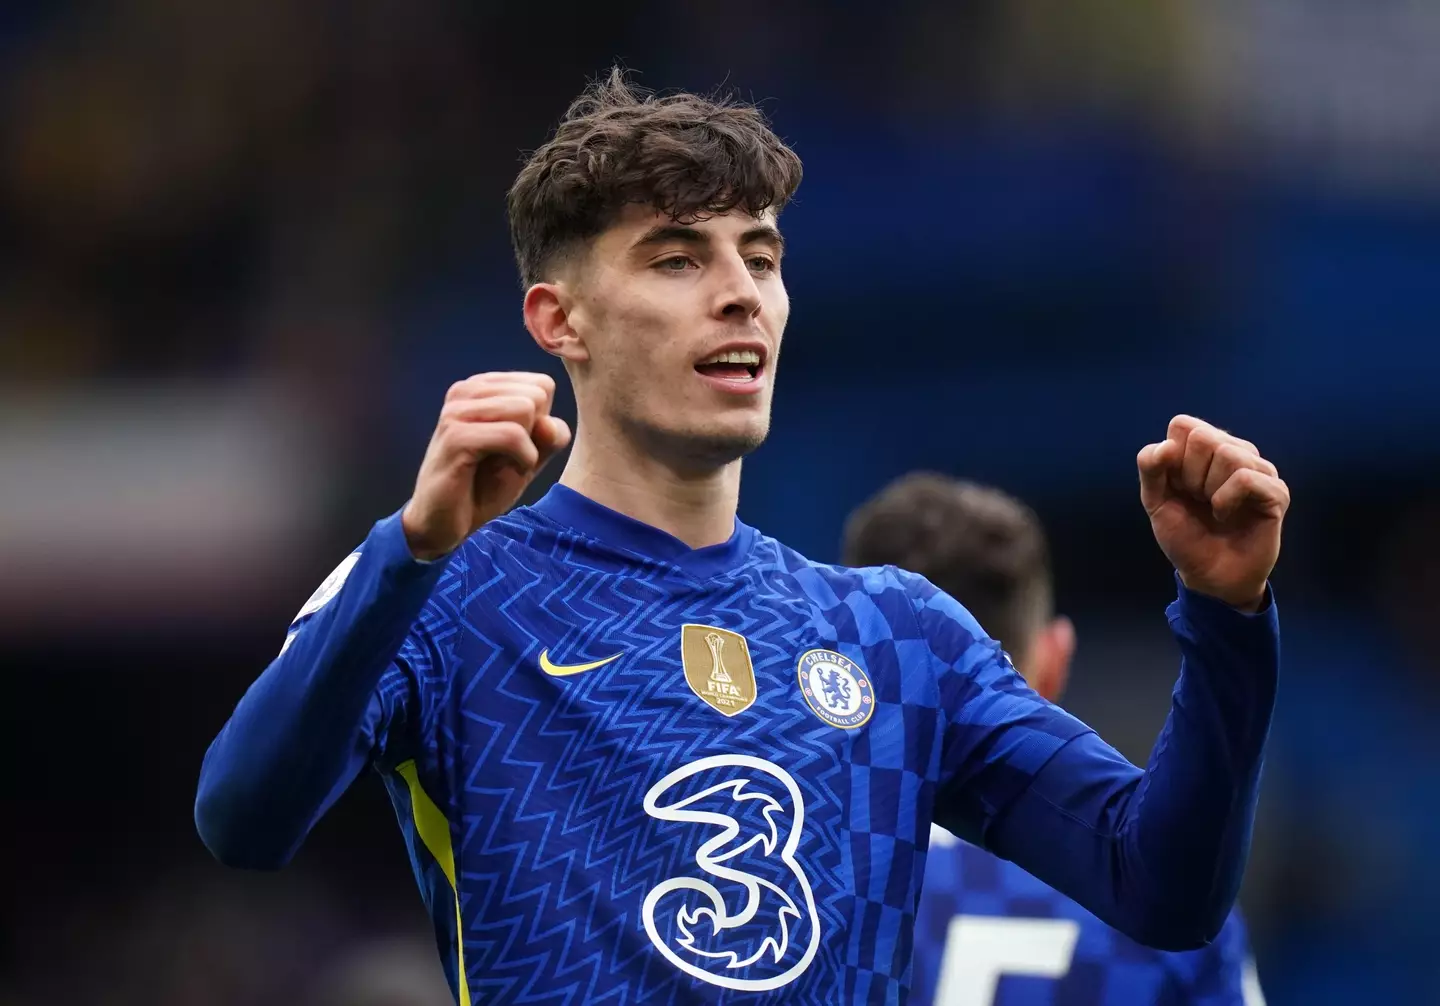 Havertz has a new position on FPL